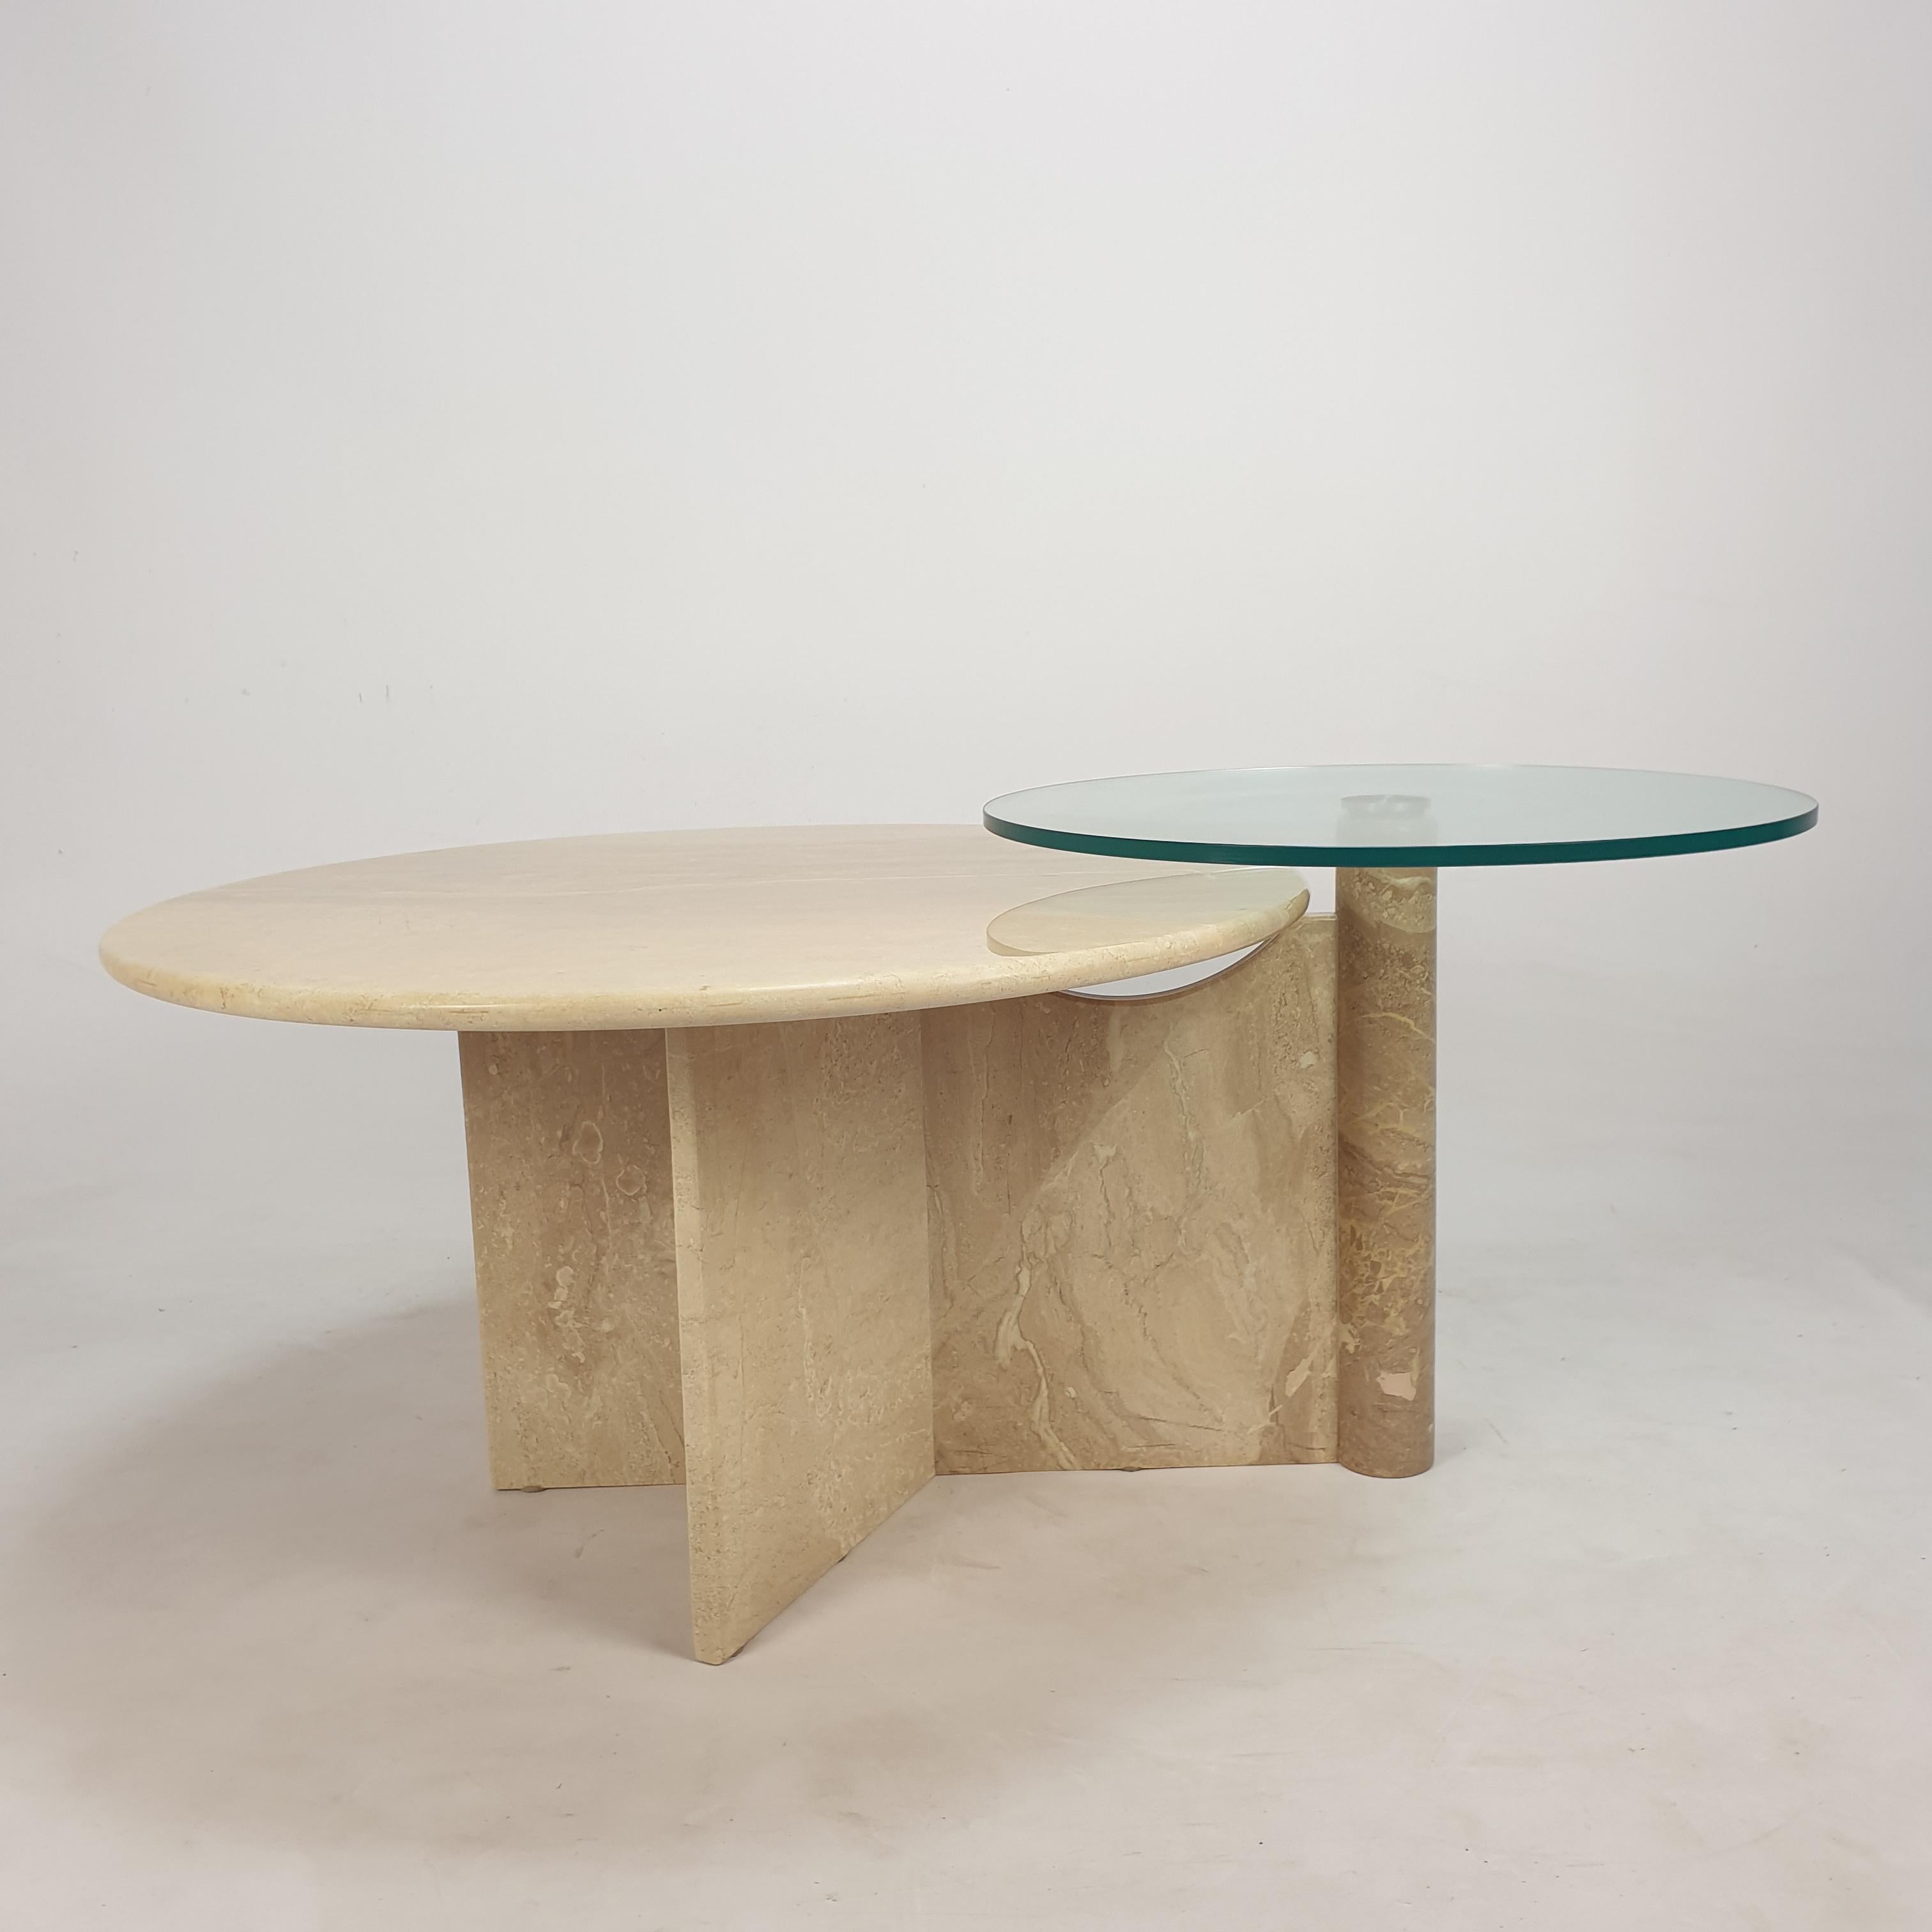 Italian Travertine and Glass Coffee Table, 1980s For Sale 4